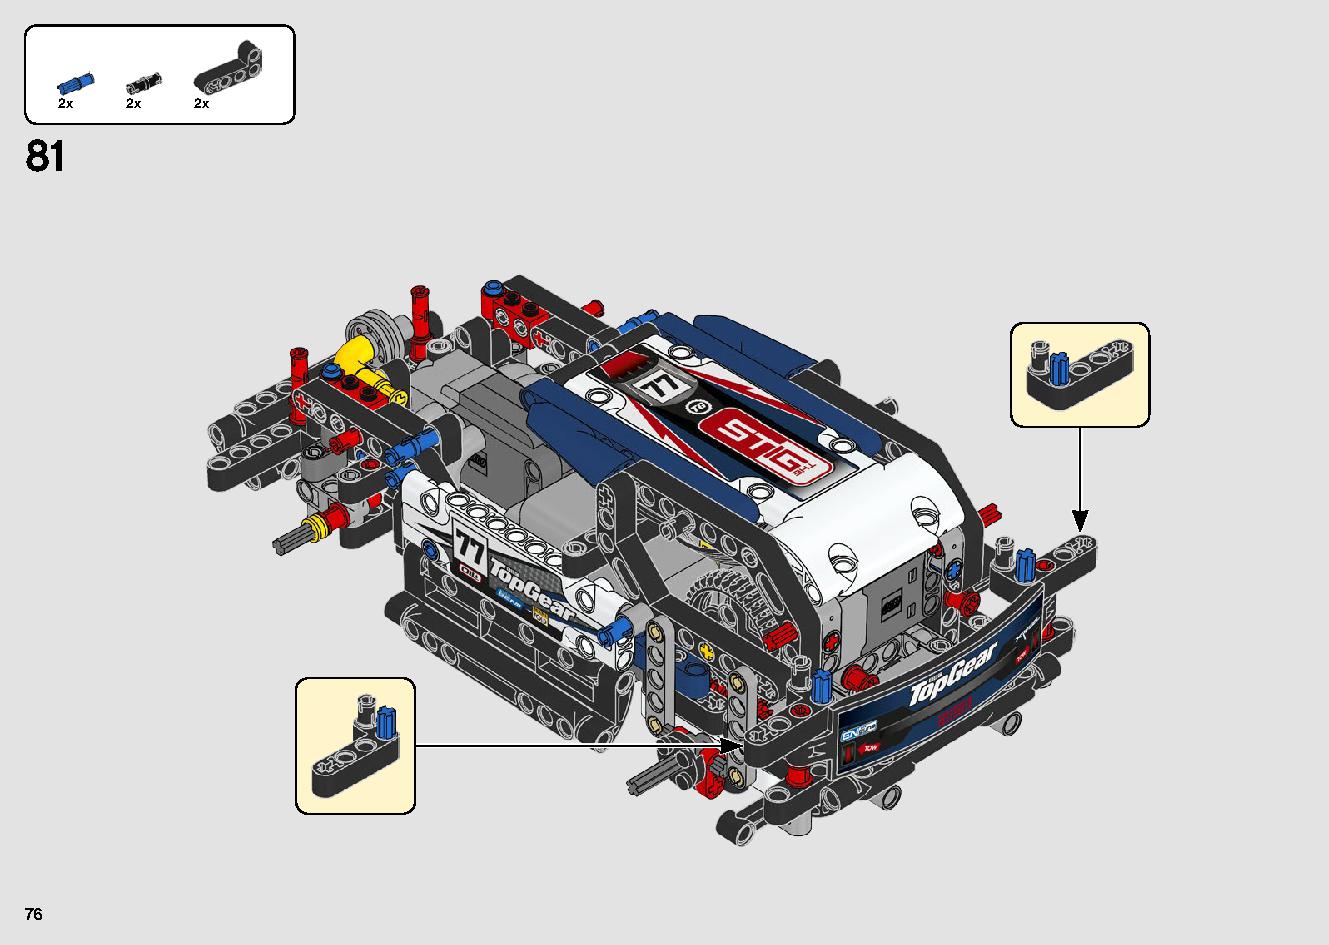 App-Controlled Top Gear Rally Car 42109 LEGO information LEGO instructions 76 page